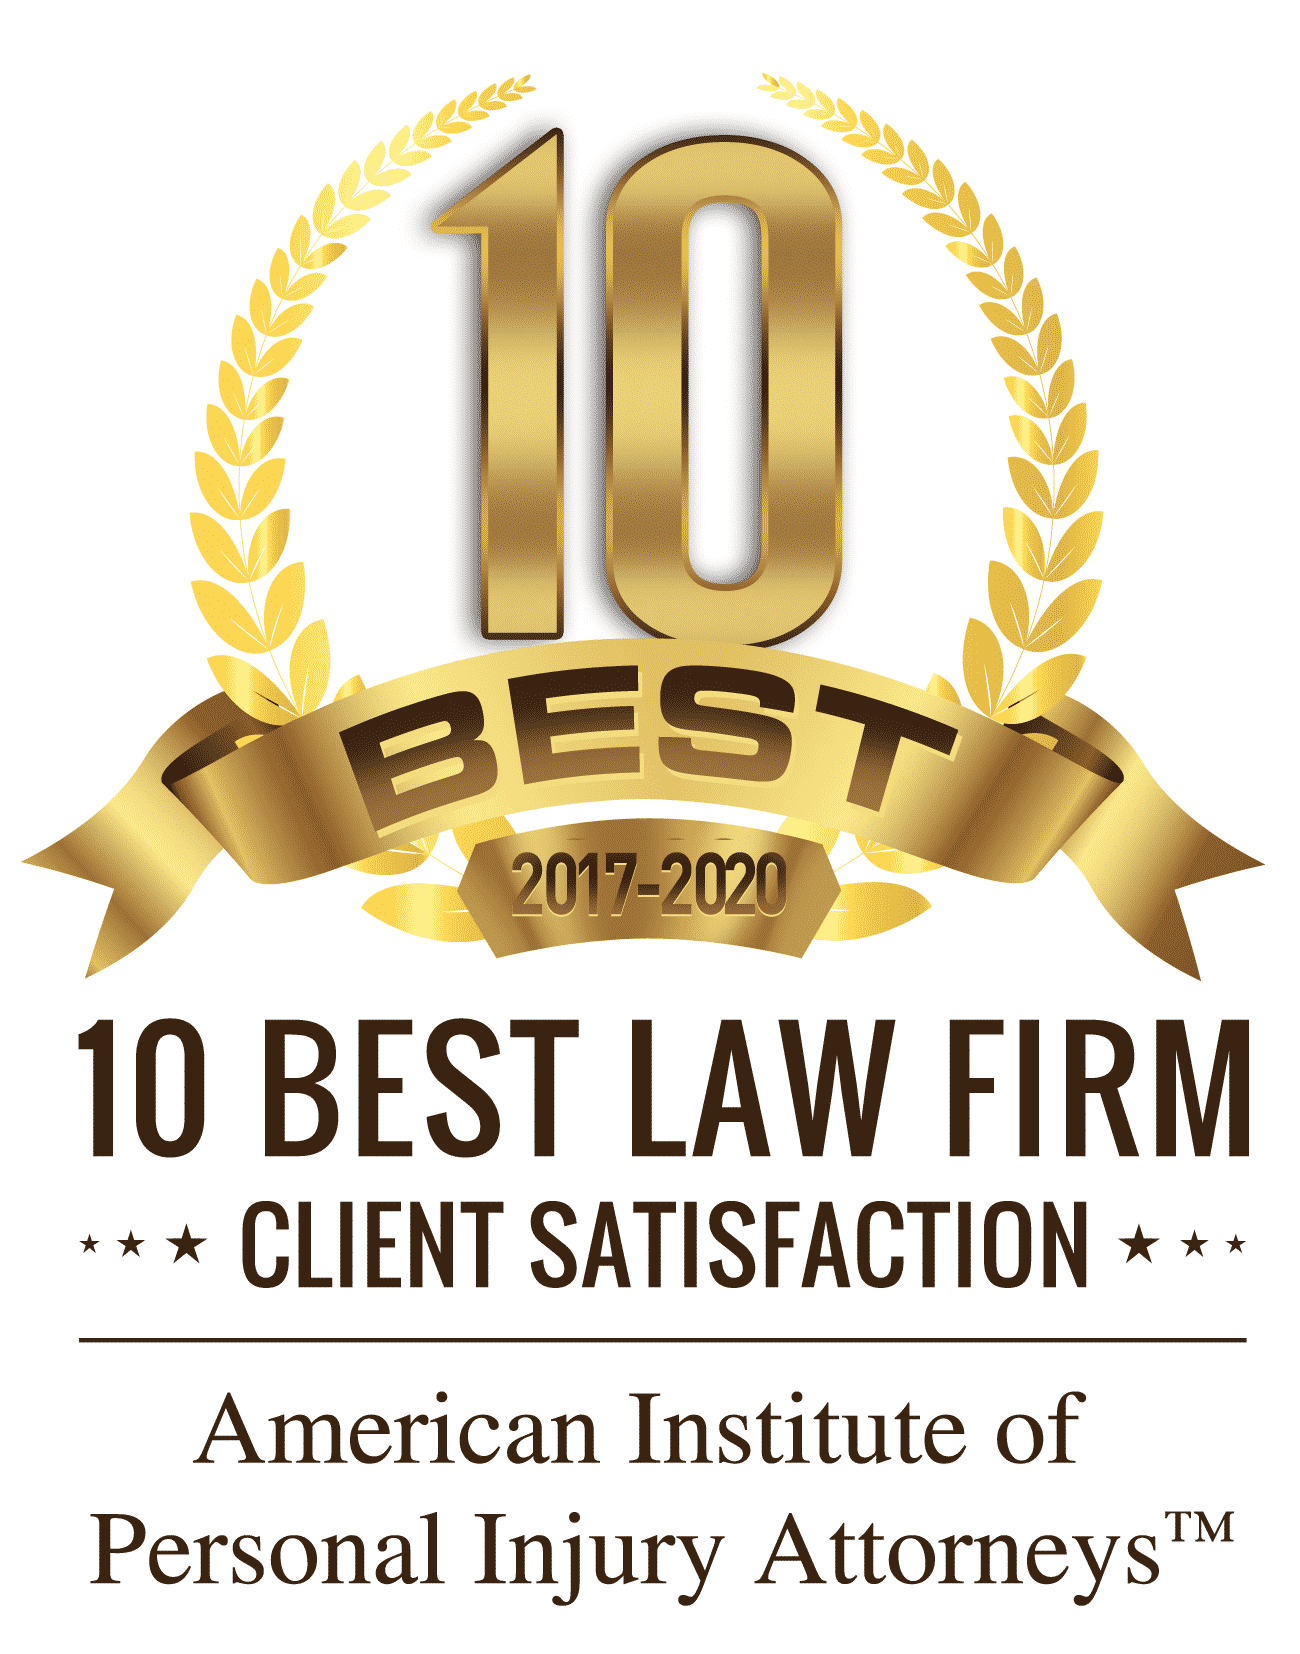 Greg Sobo 10 Best Attorney Award for Client Satisfaction